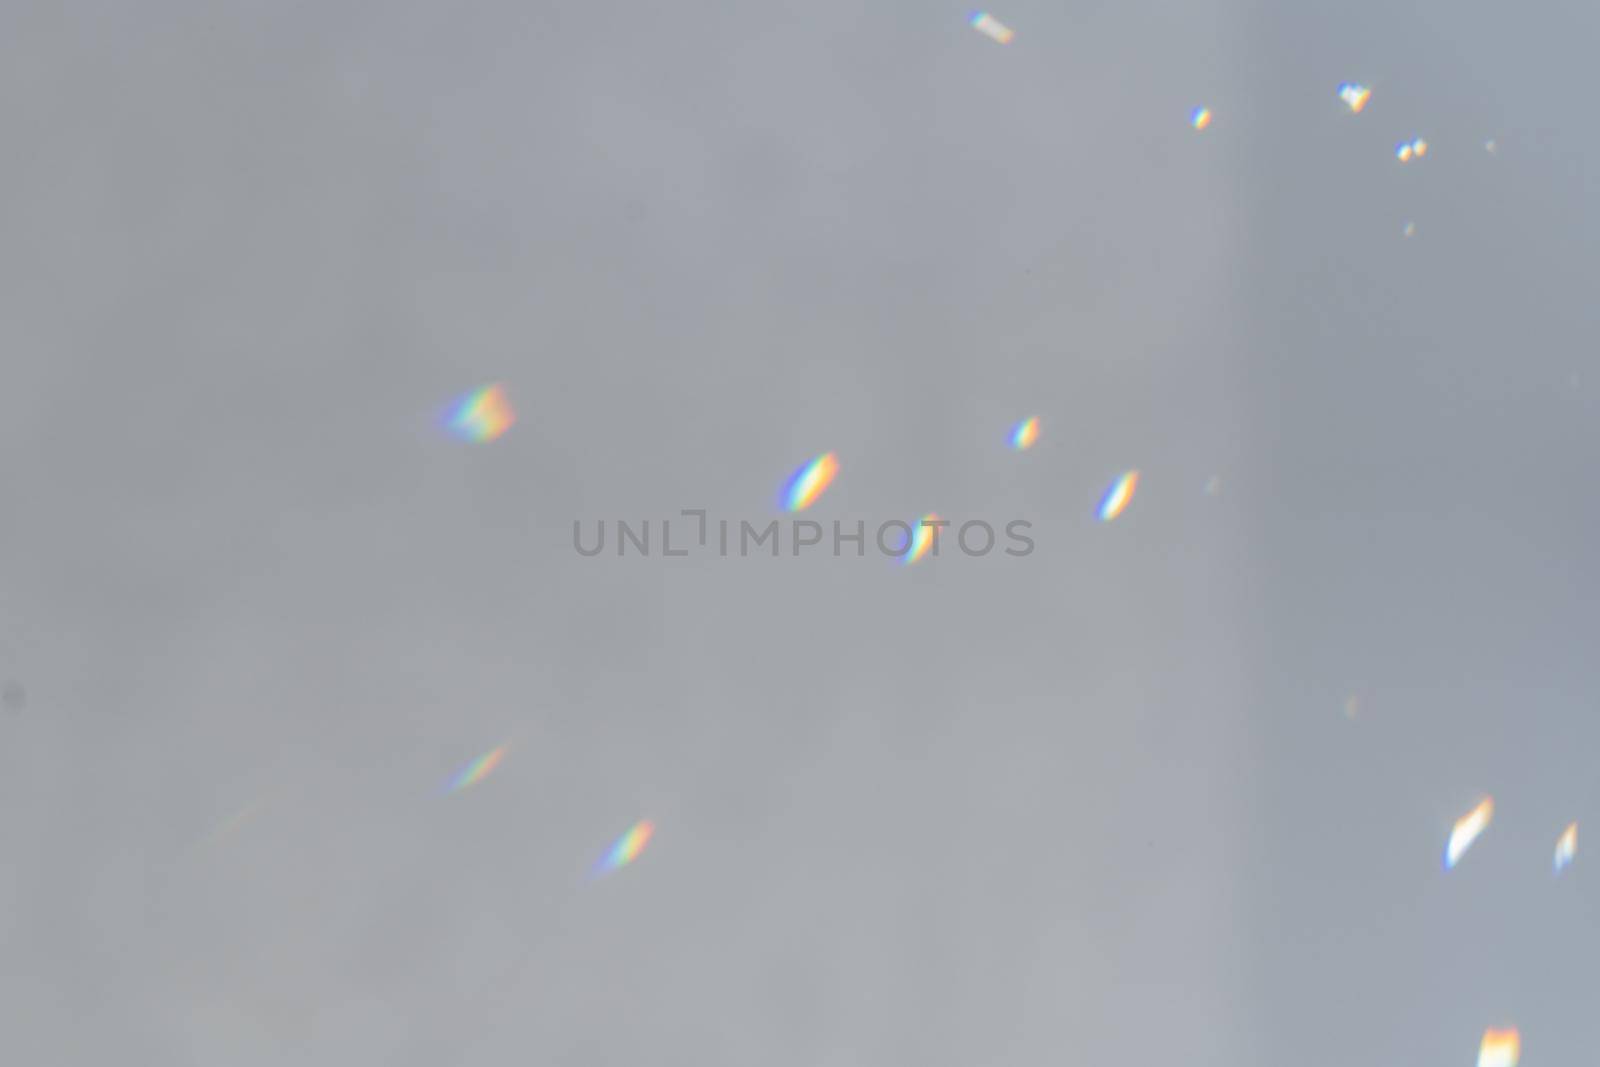 .Rainbow holographic shadow mock up, iridescent prismatic wallpaper. Abstract prism reflection, rays leaking through lens effect. Crystal light reflections for overlay mockup on light background.